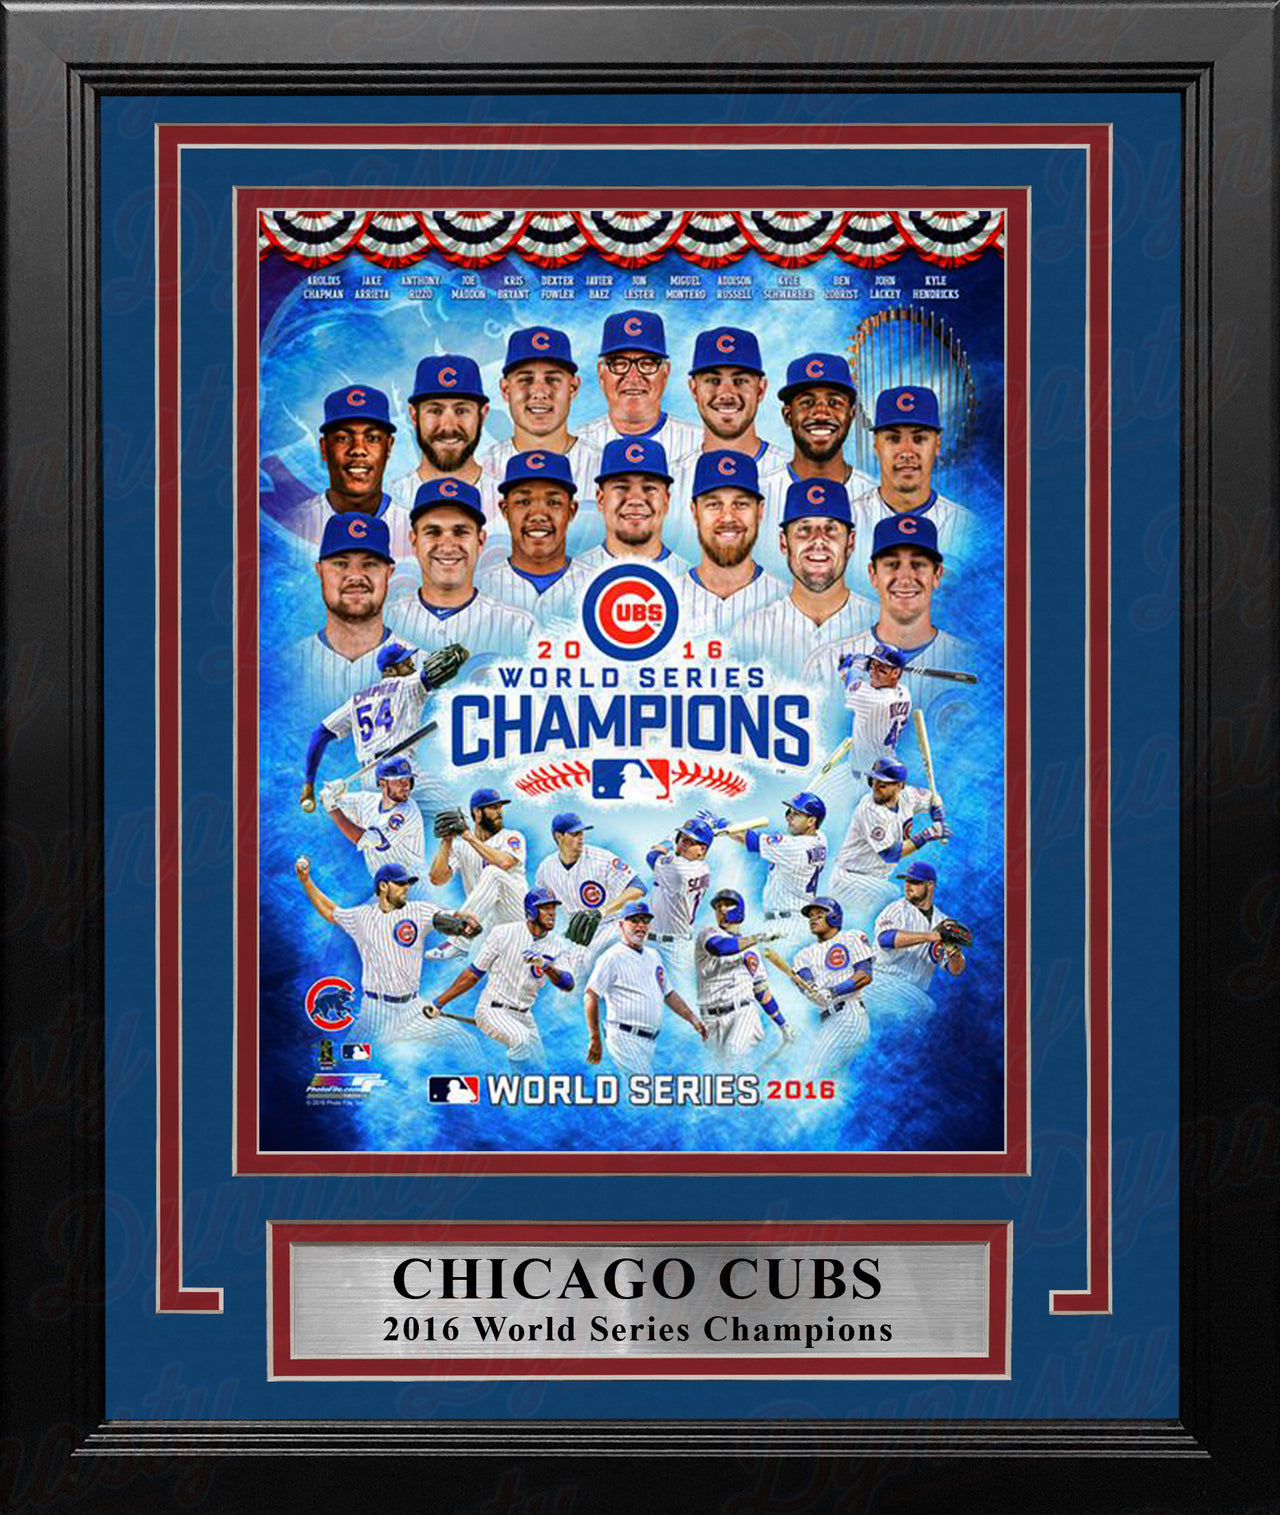 Chicago Cubs 2016 World Series Champions 8" x 10" Framed Baseball Collage Photo - Dynasty Sports & Framing 